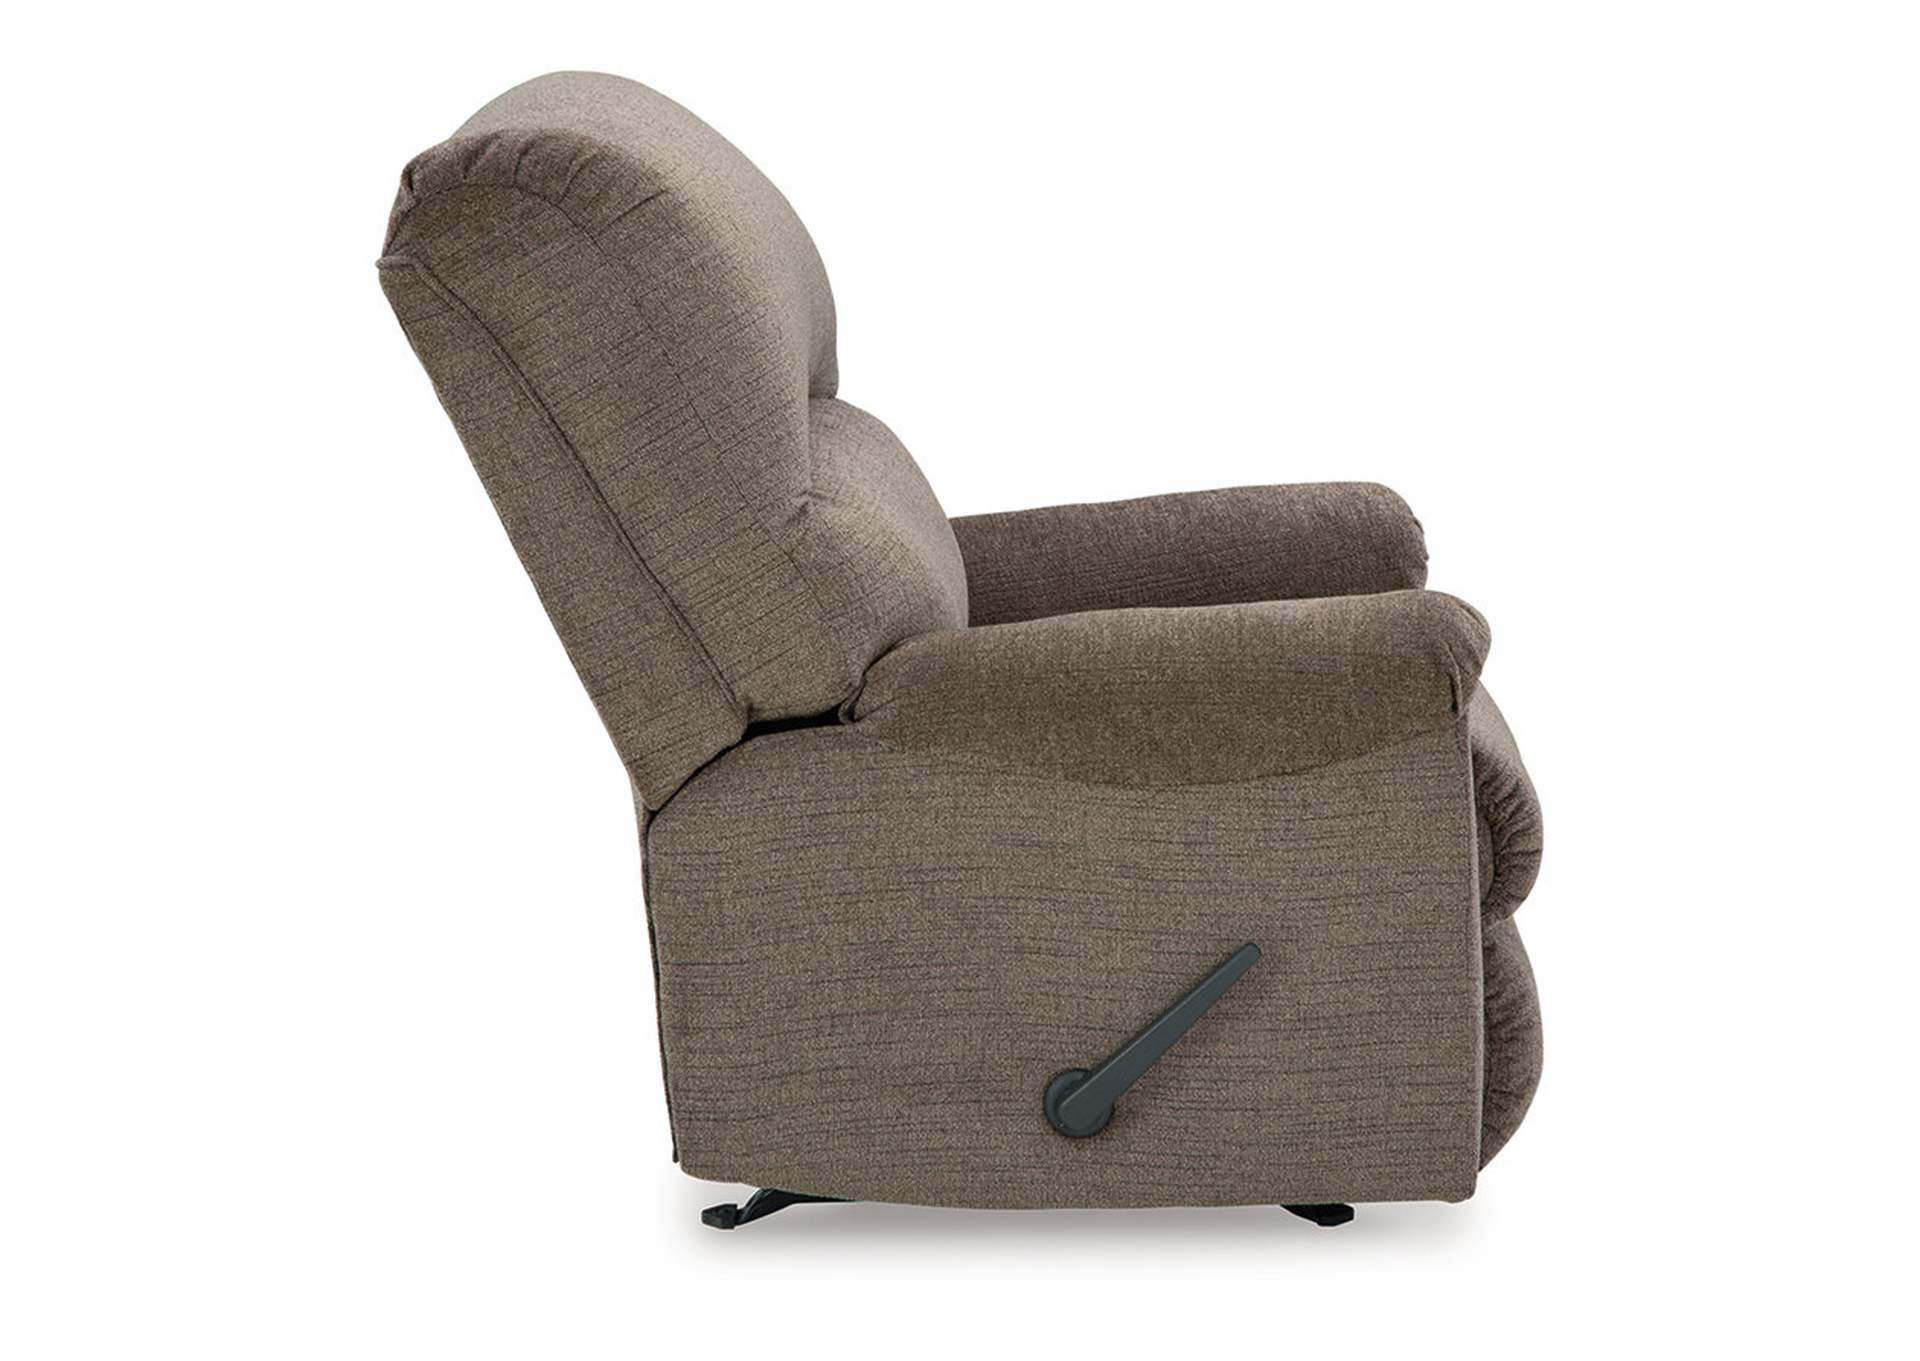 Stonemeade Recliner,Signature Design By Ashley